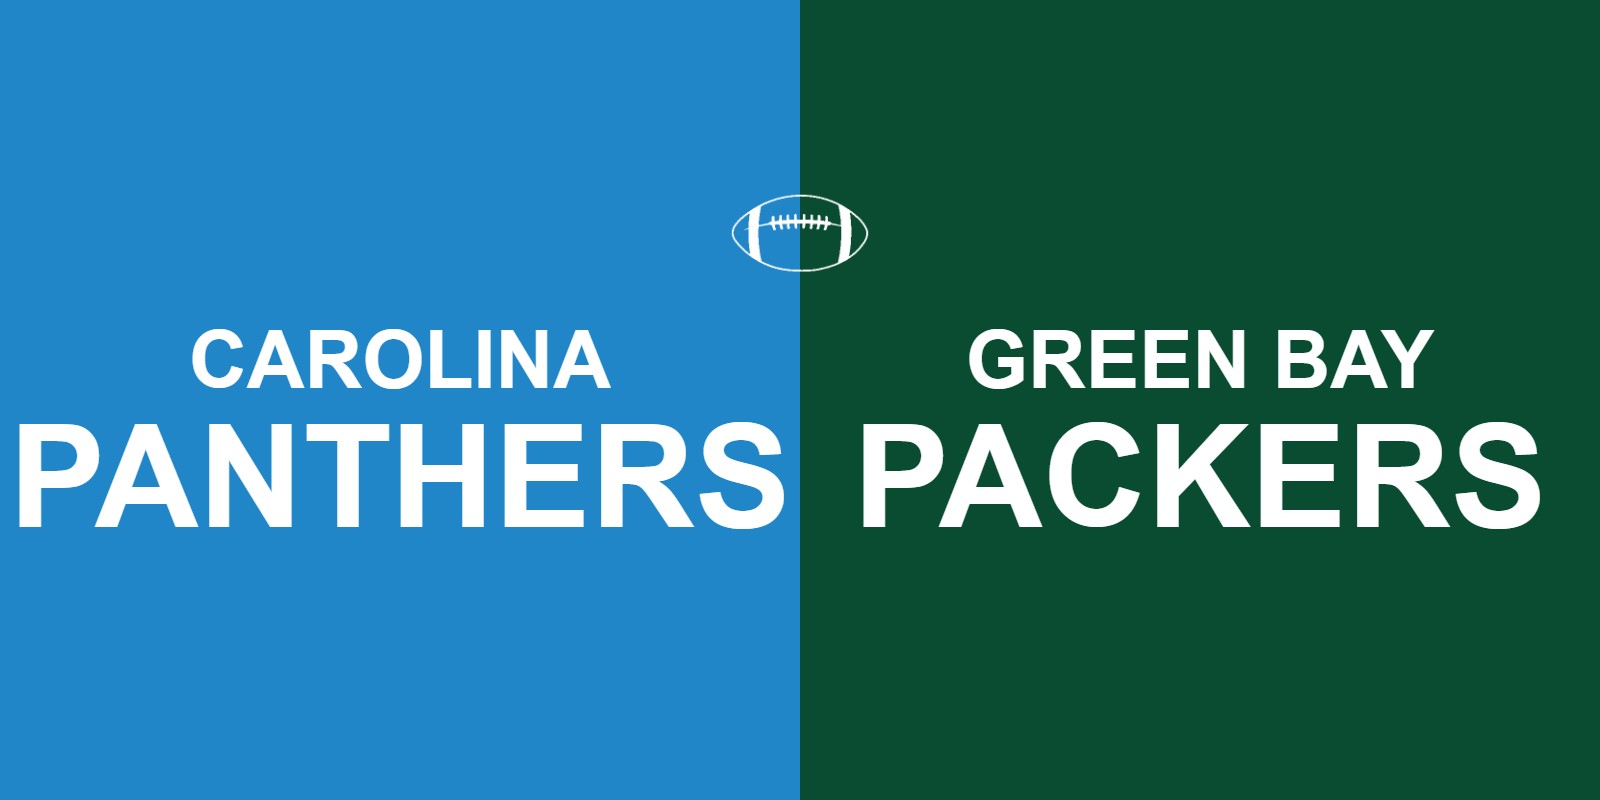 Panthers vs Packers